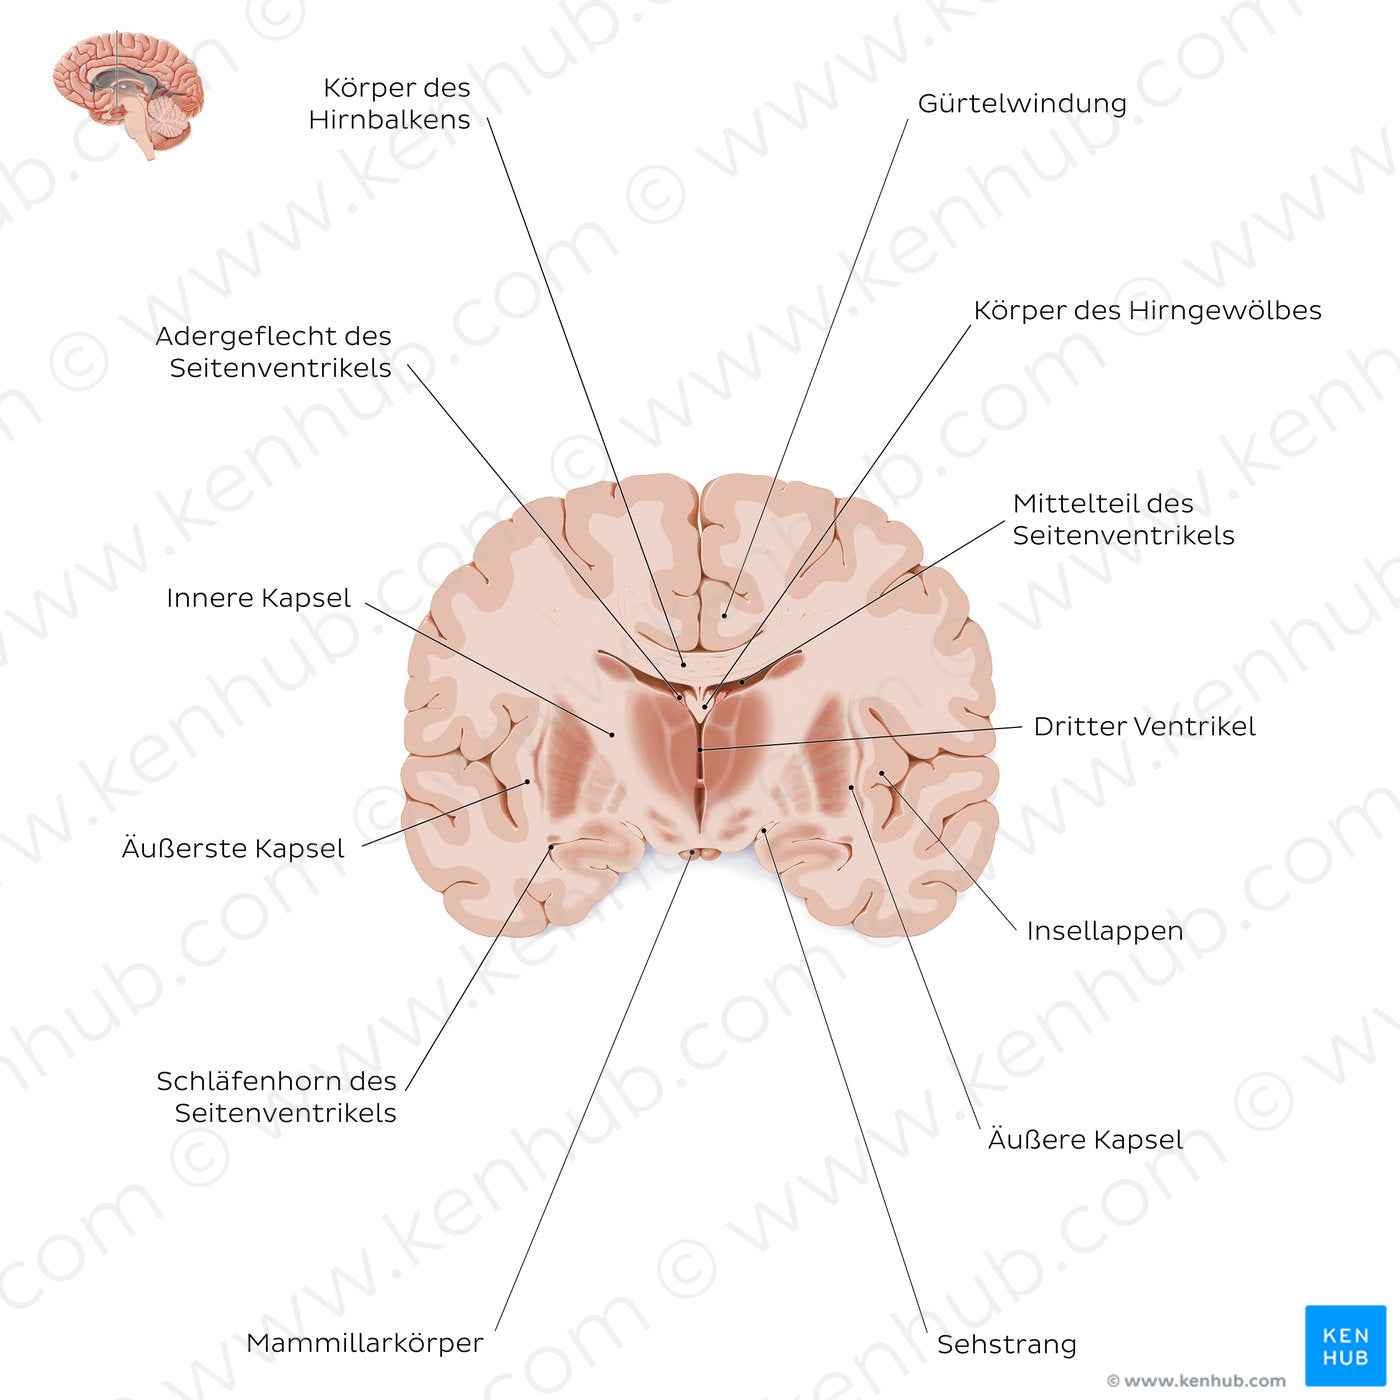 Coronal section of the brain (thalamus level): White matter structures (German)